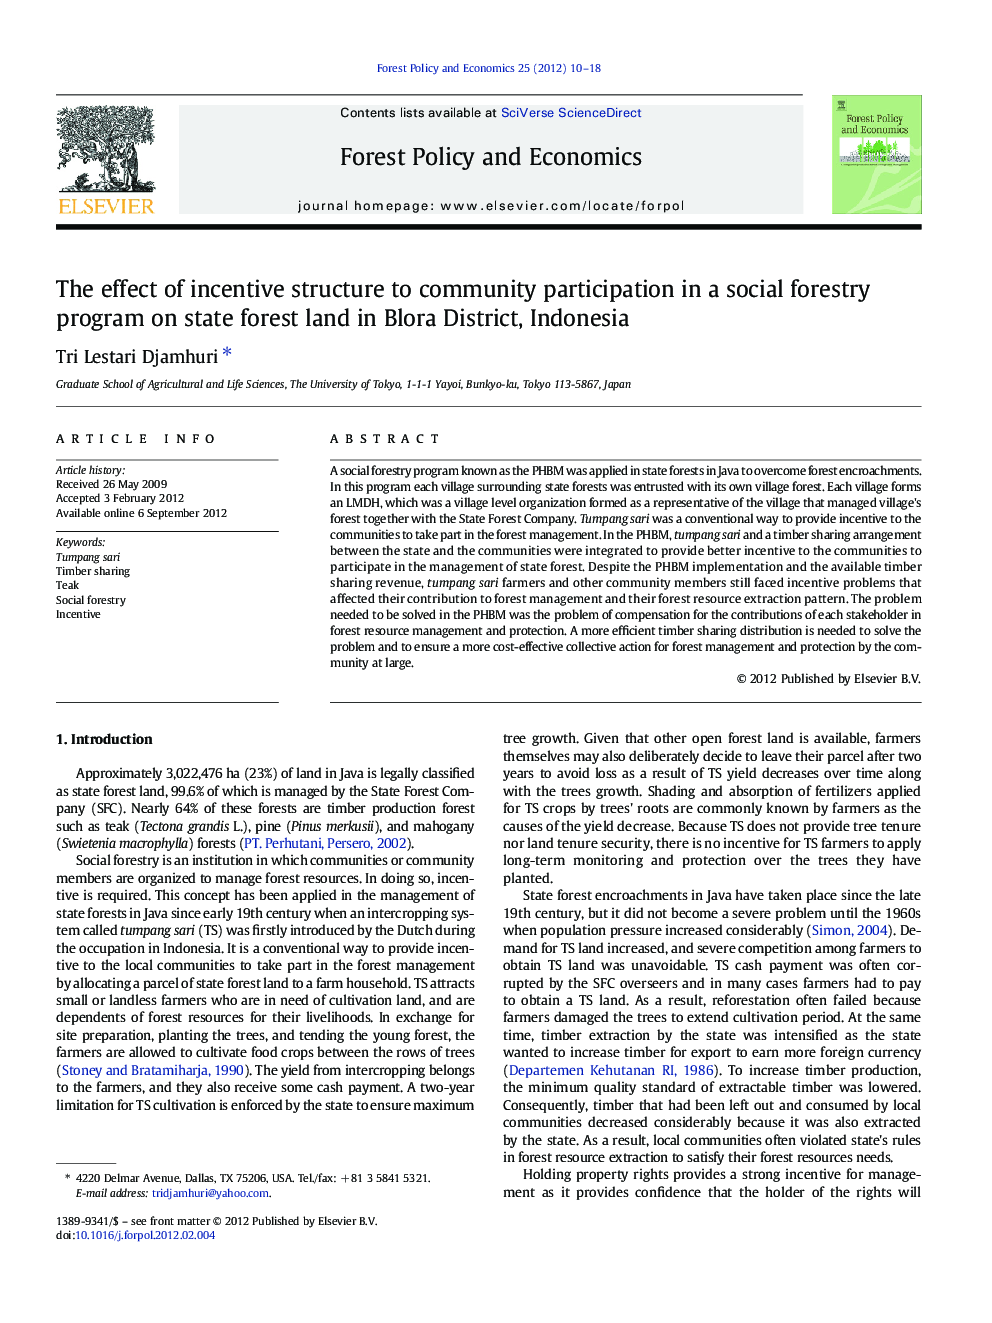 The effect of incentive structure to community participation in a social forestry program on state forest land in Blora District, Indonesia